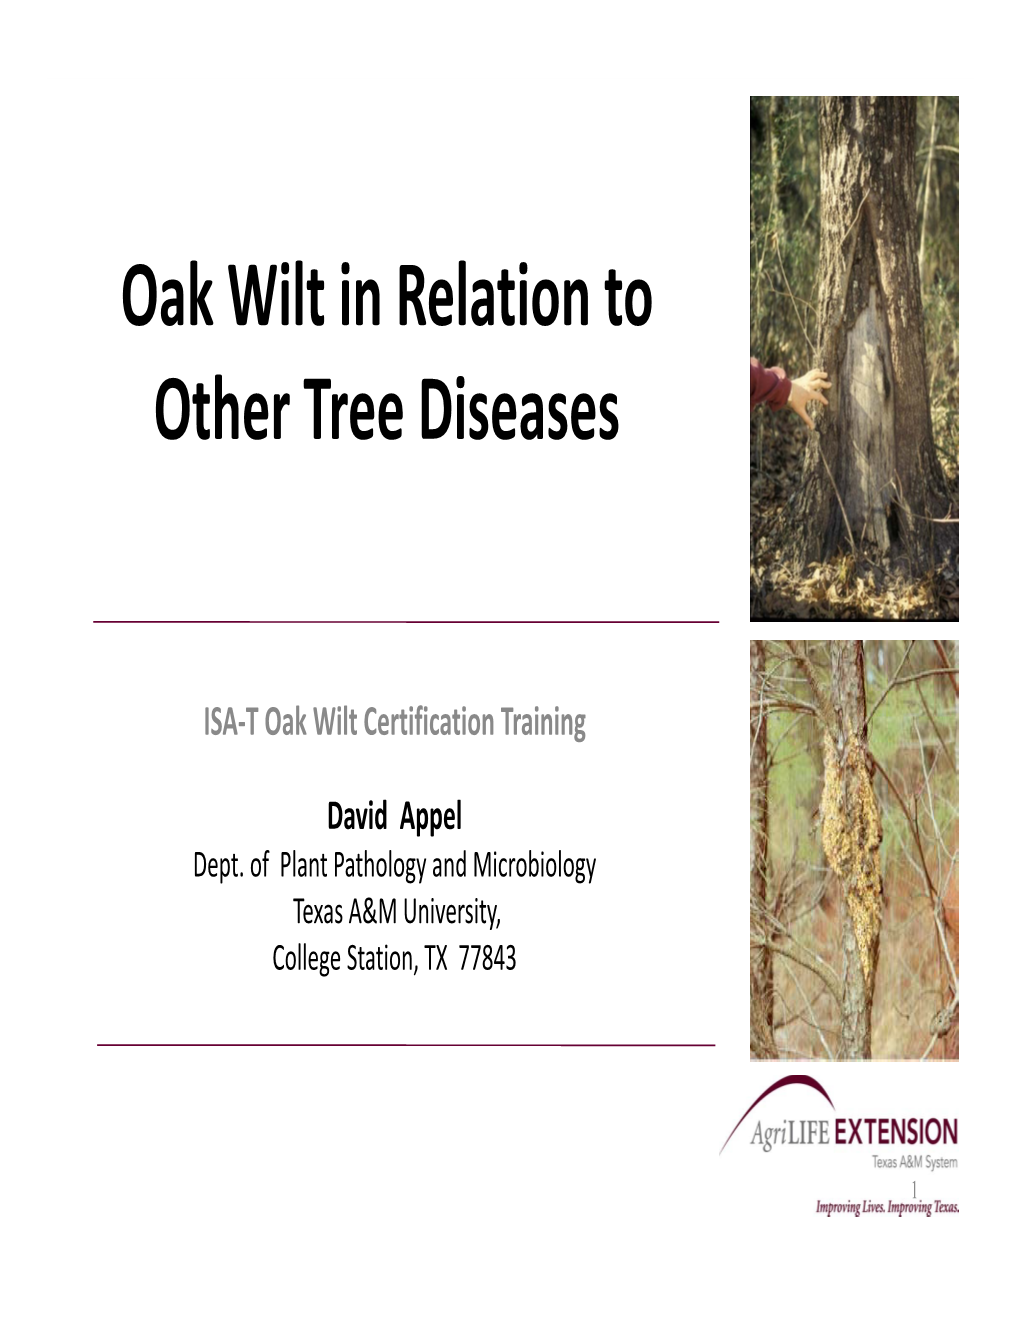 Oak Wilt in Relation to Other Tree Diseases